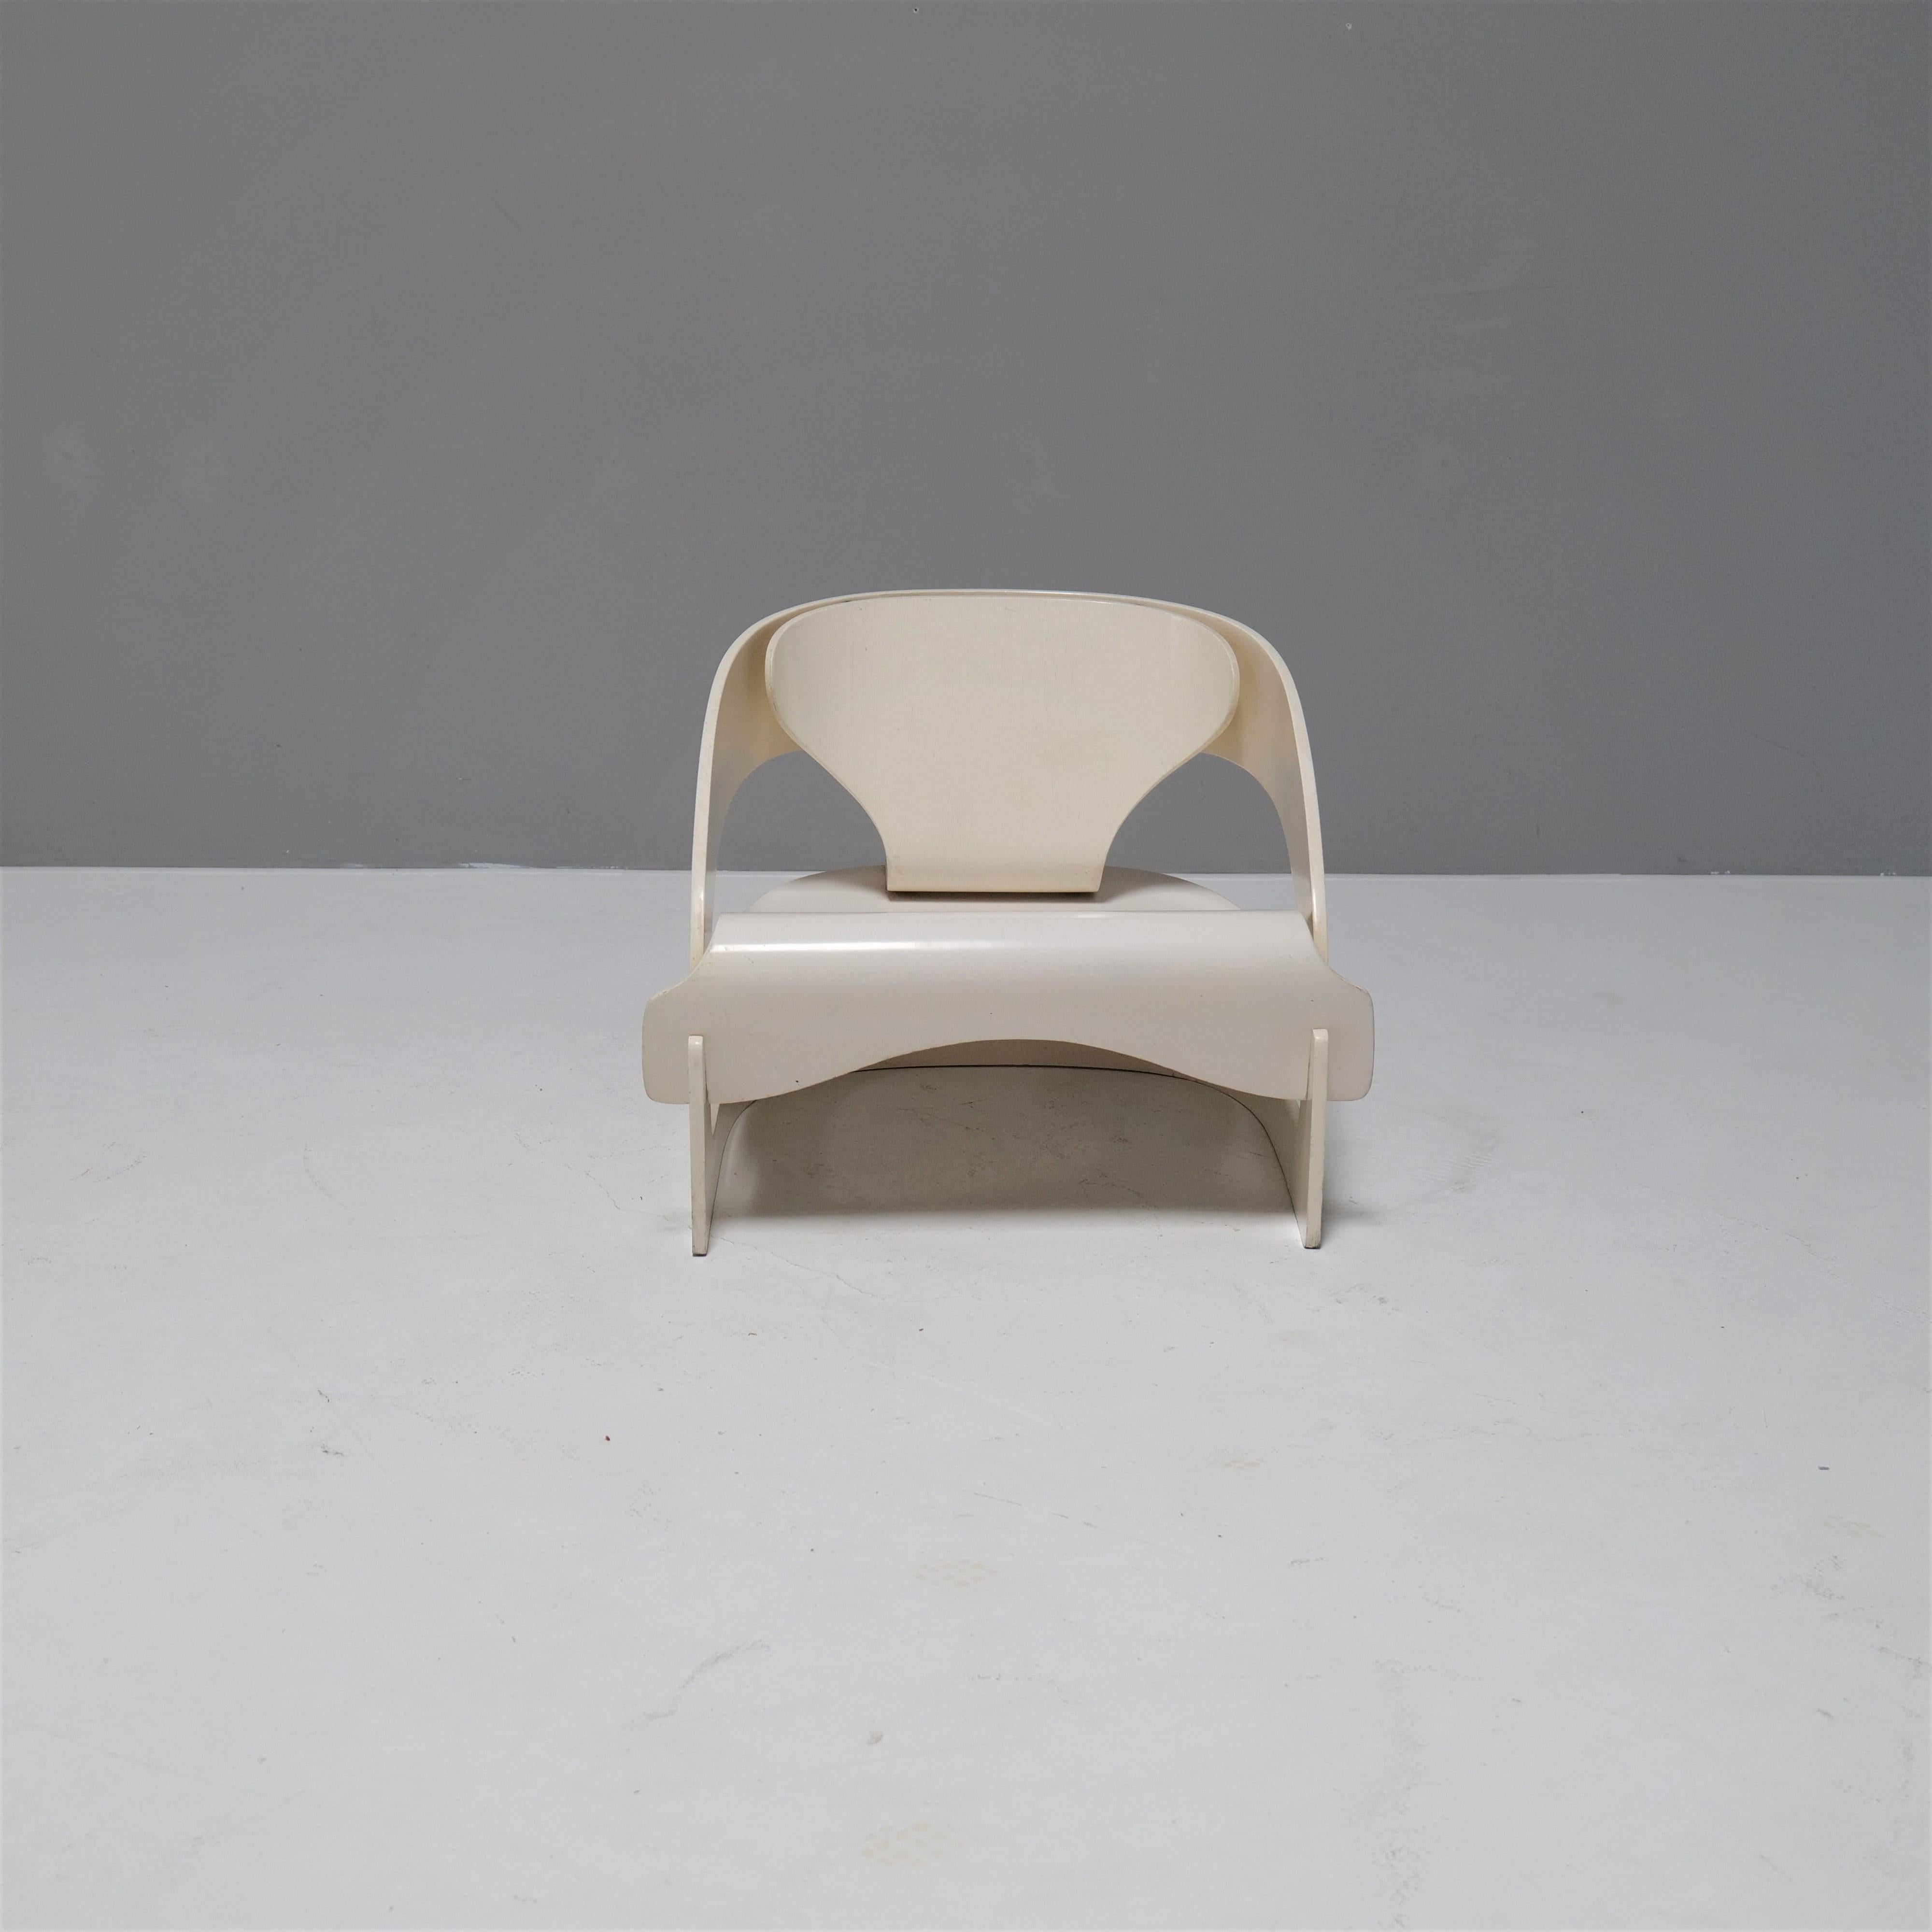 The armchair consists only of three molded plywood parts that are put together without glue.
This early model comes from a private collection and is still in its original condition.